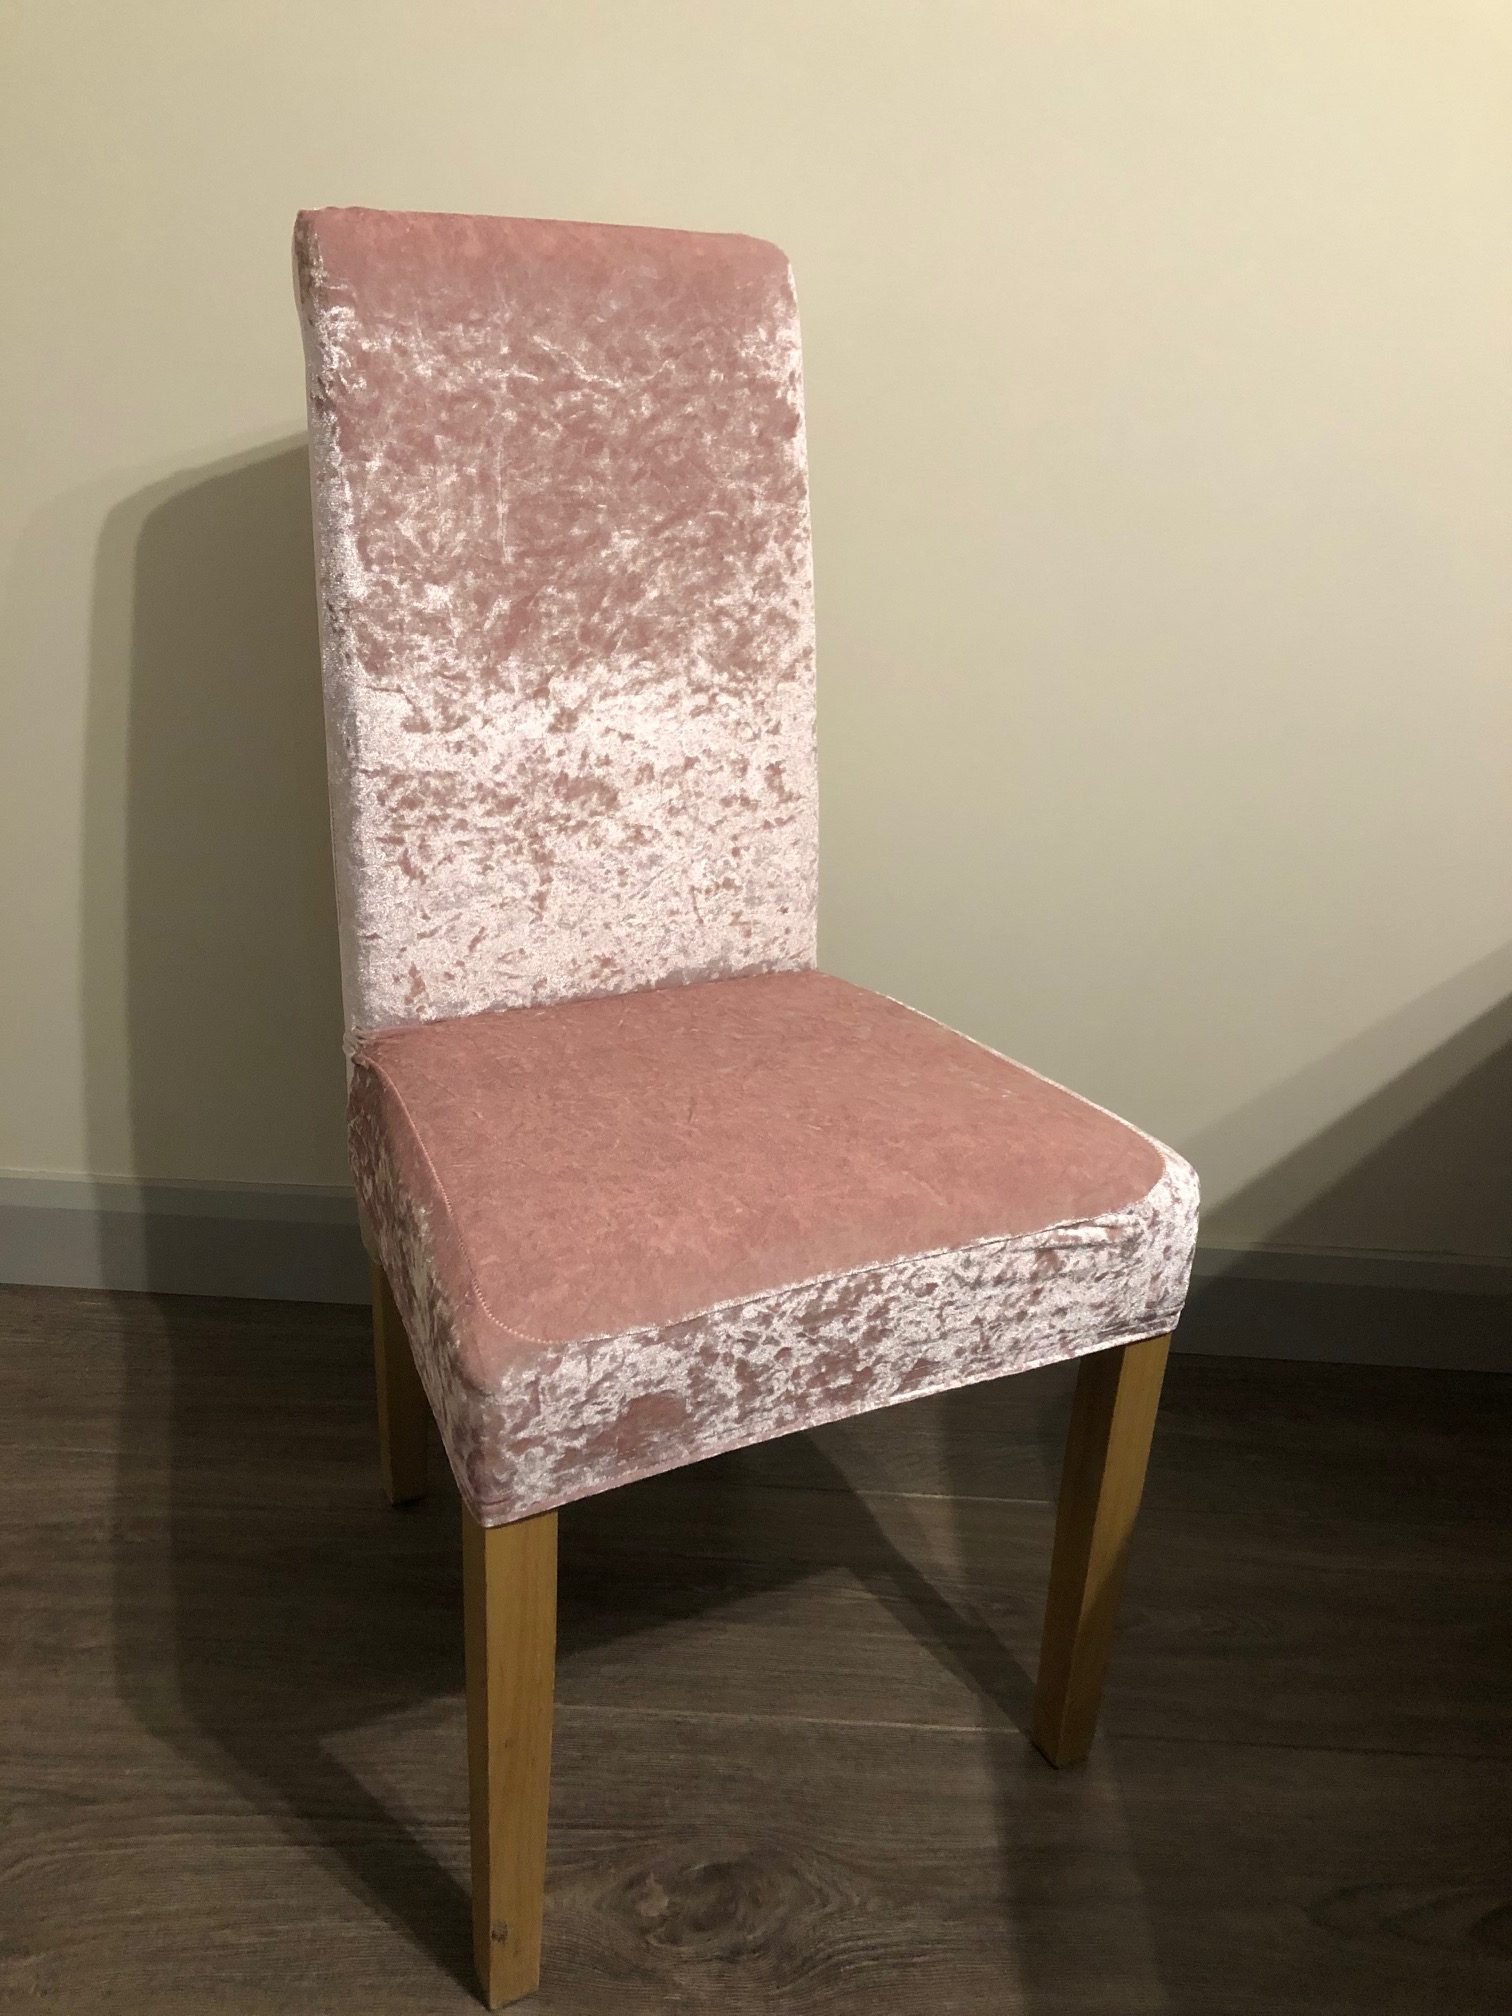 Crushed Velvet Chair Cover Light Pink Jf Chair Covers